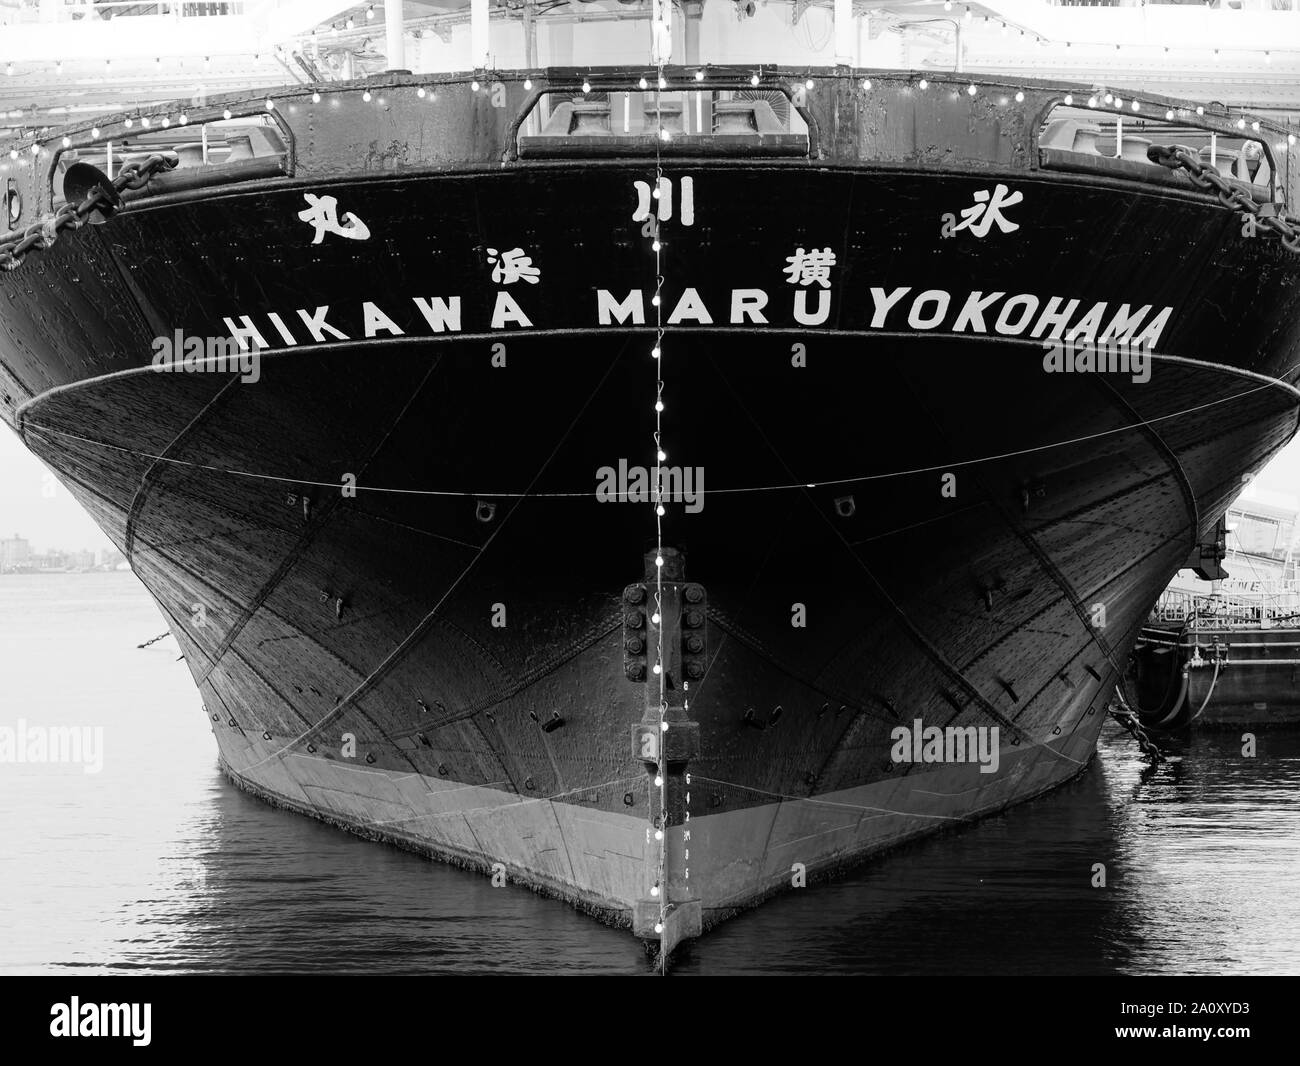 Front view of Hikawa Maru in Black and White. She is a vintage ocean liner and berthed as a museum ship at Yamashita Park in Yokohama City, Japan. Stock Photo